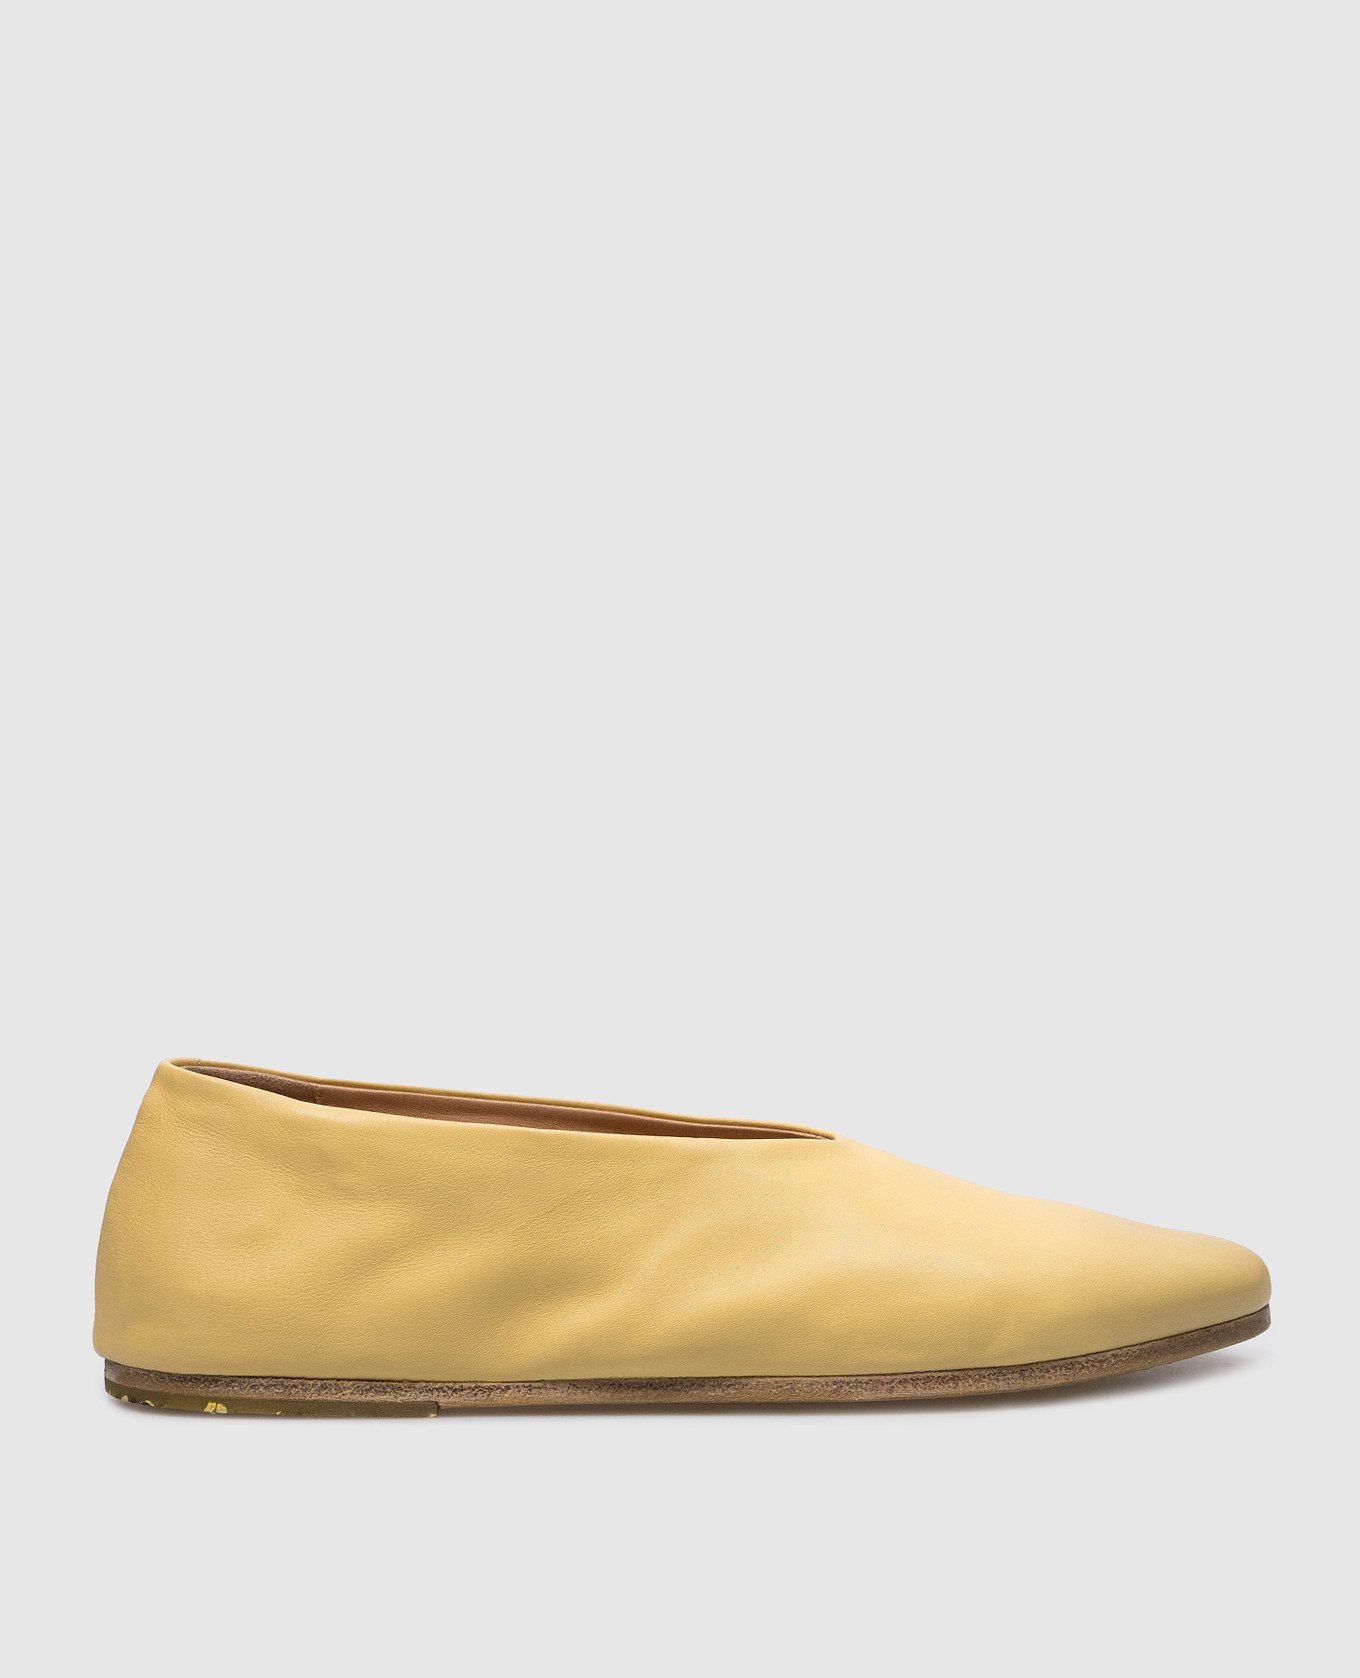 Yellow leather ballerina shoes